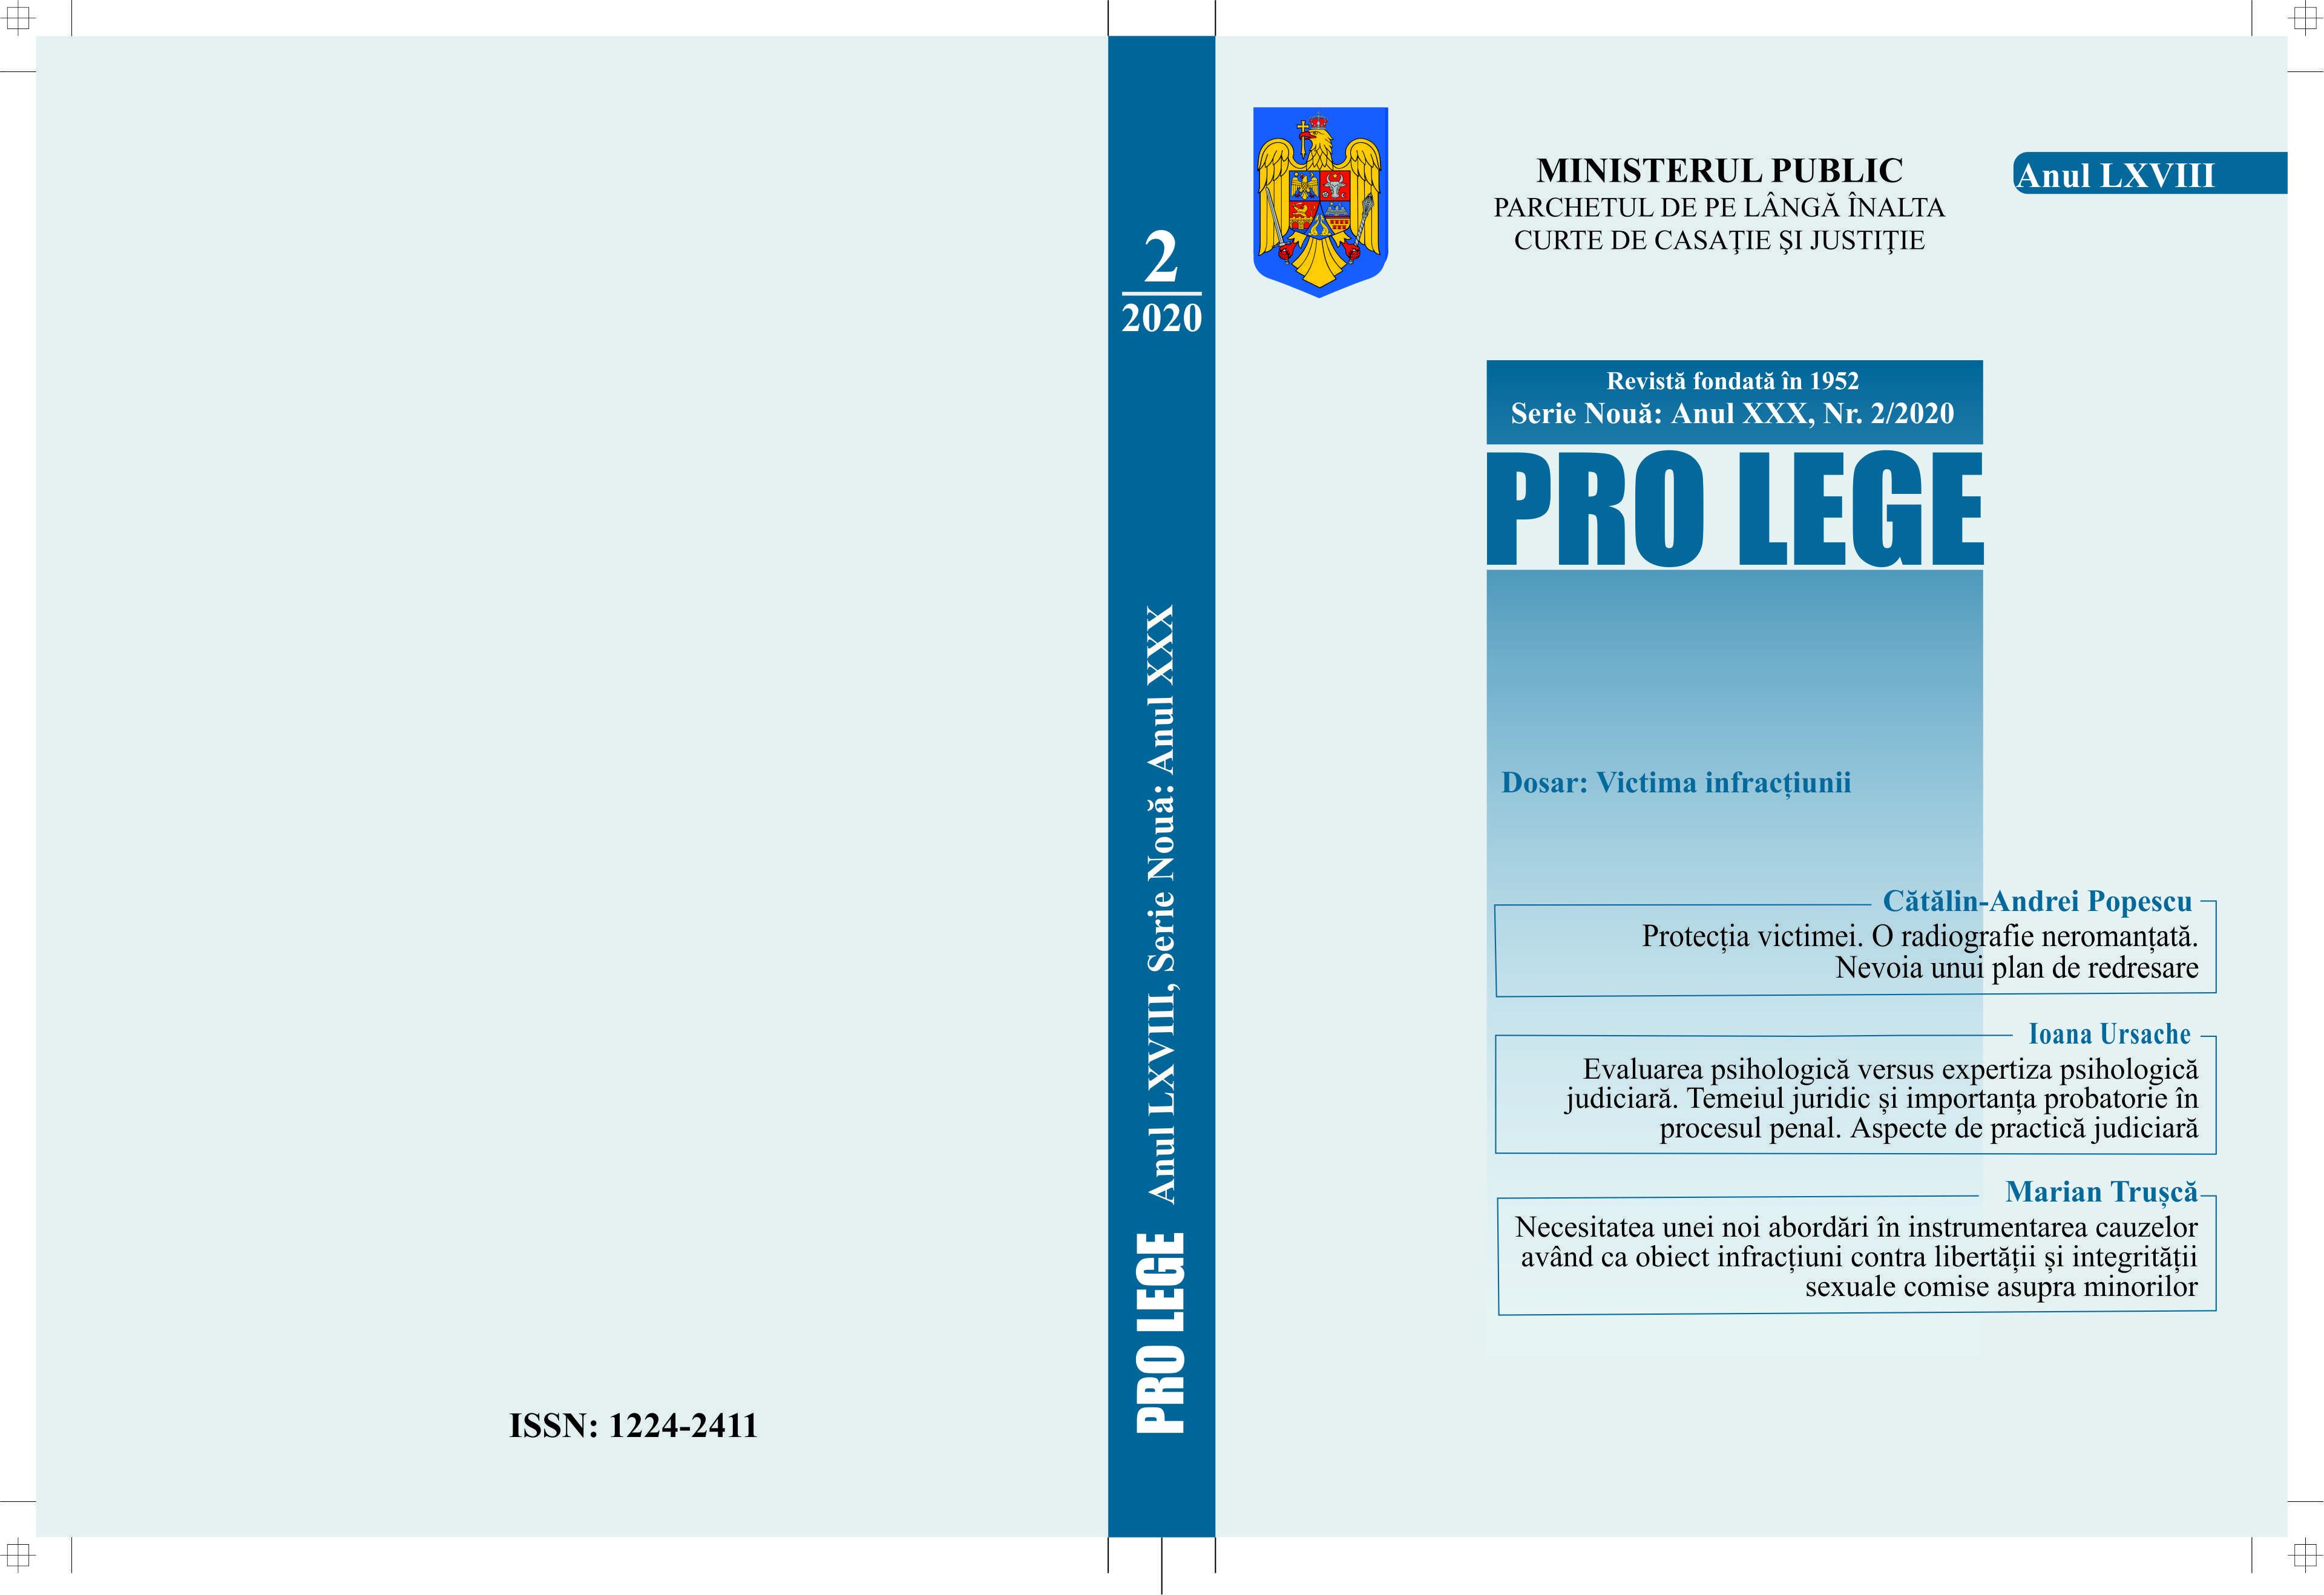 The conclusions of the General Prosecutor George Filitti in the appeal of Prince Gr. Sturdza and juvenile Mihail M. Sturdza Cover Image